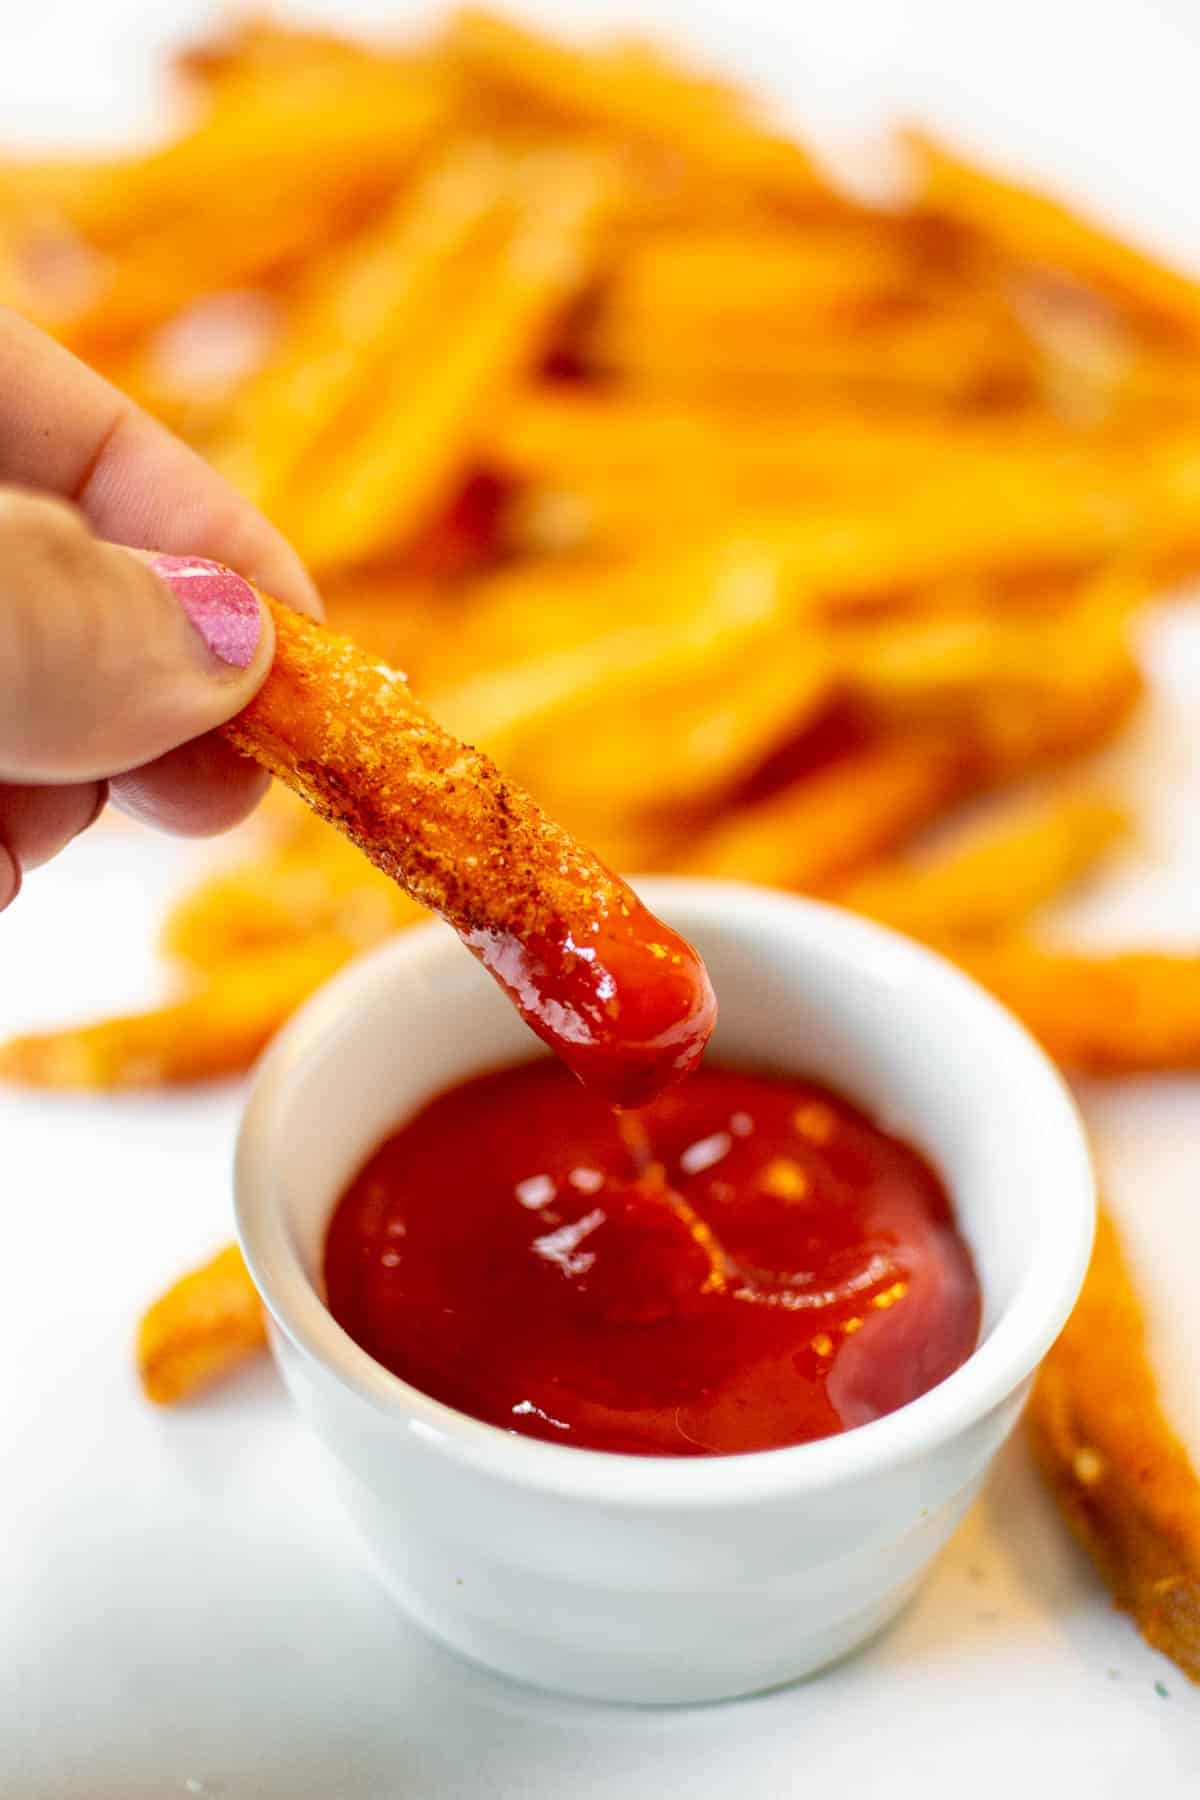 One sweet potato fry cooked in the air fryer dipped in ketchup.